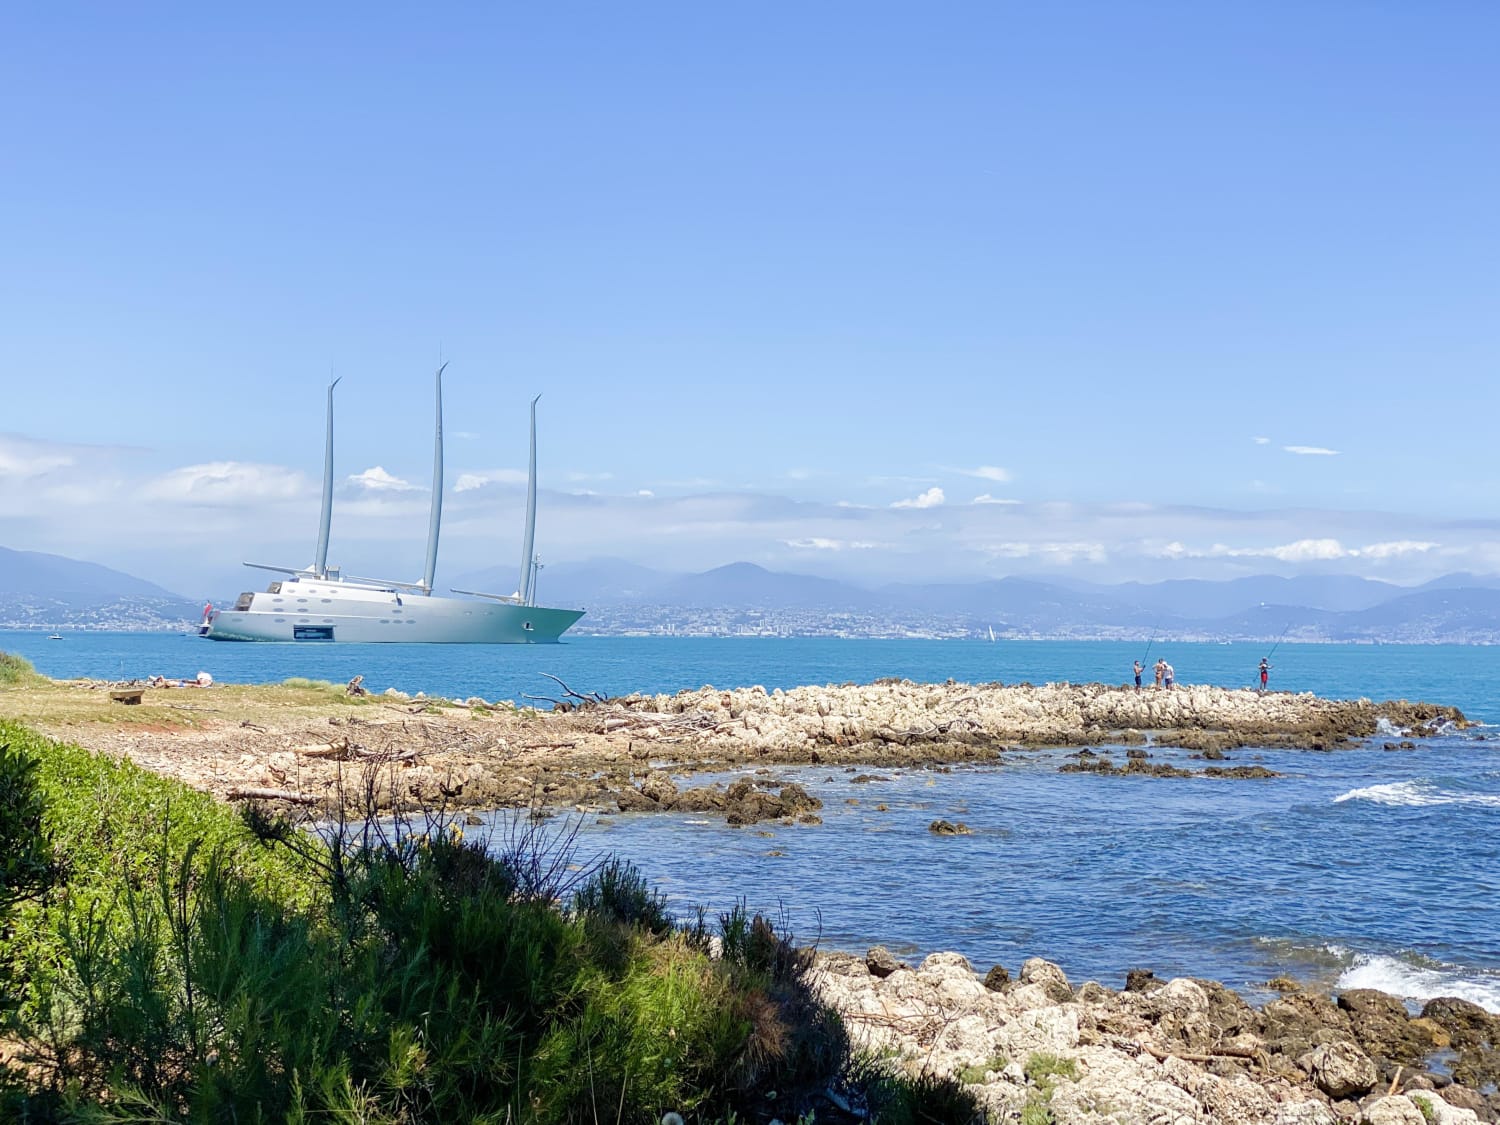 Sailing Yacht "A", seen in Antibes today.